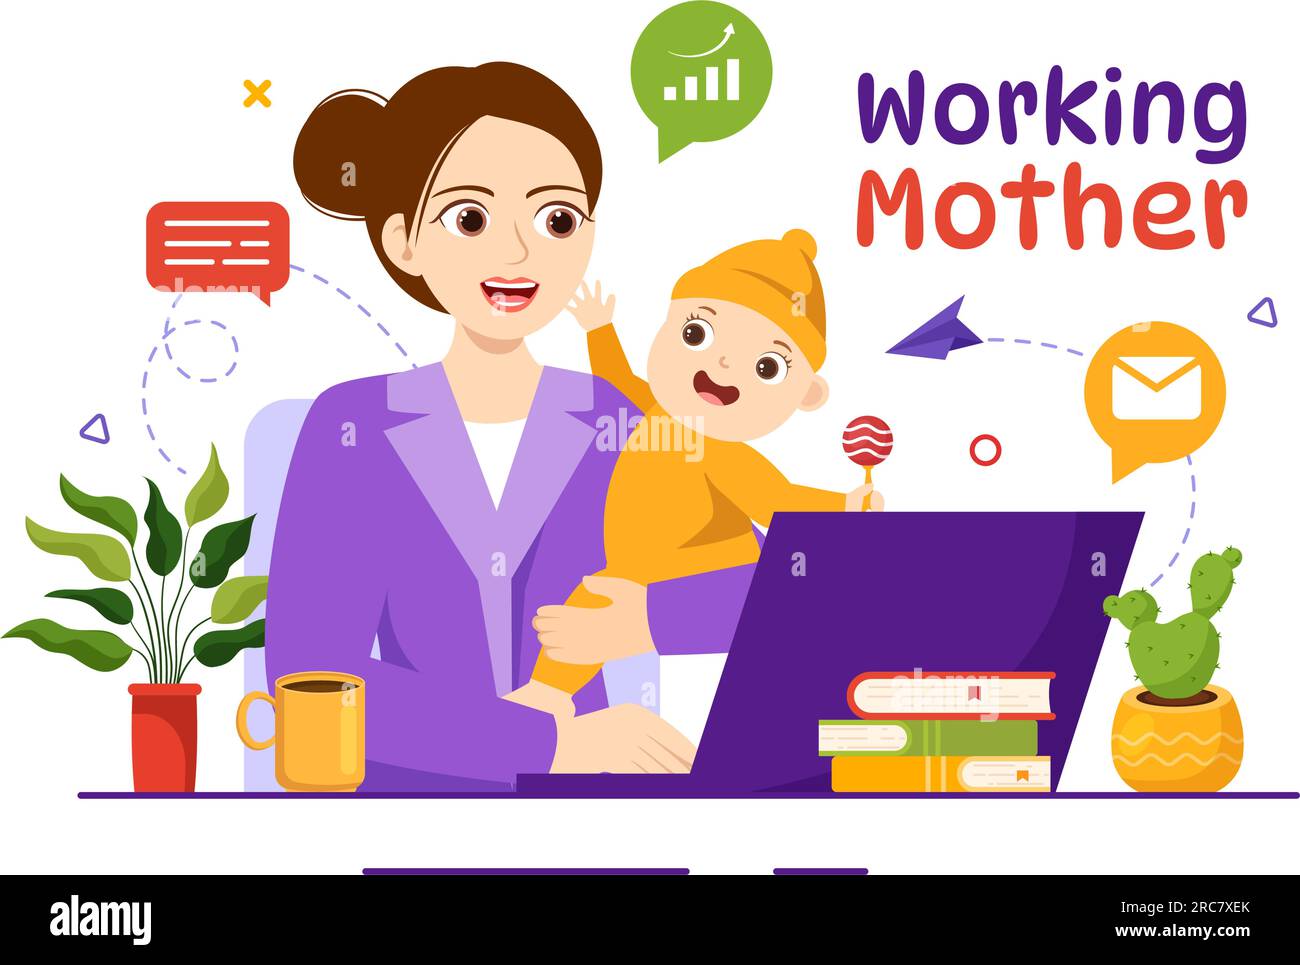 Working Mother Vector Illustration with Mothers who does Work and Takes Care of her Kids at the Home in Multitasking Cartoon Hand Drawn Templates Stock Vector